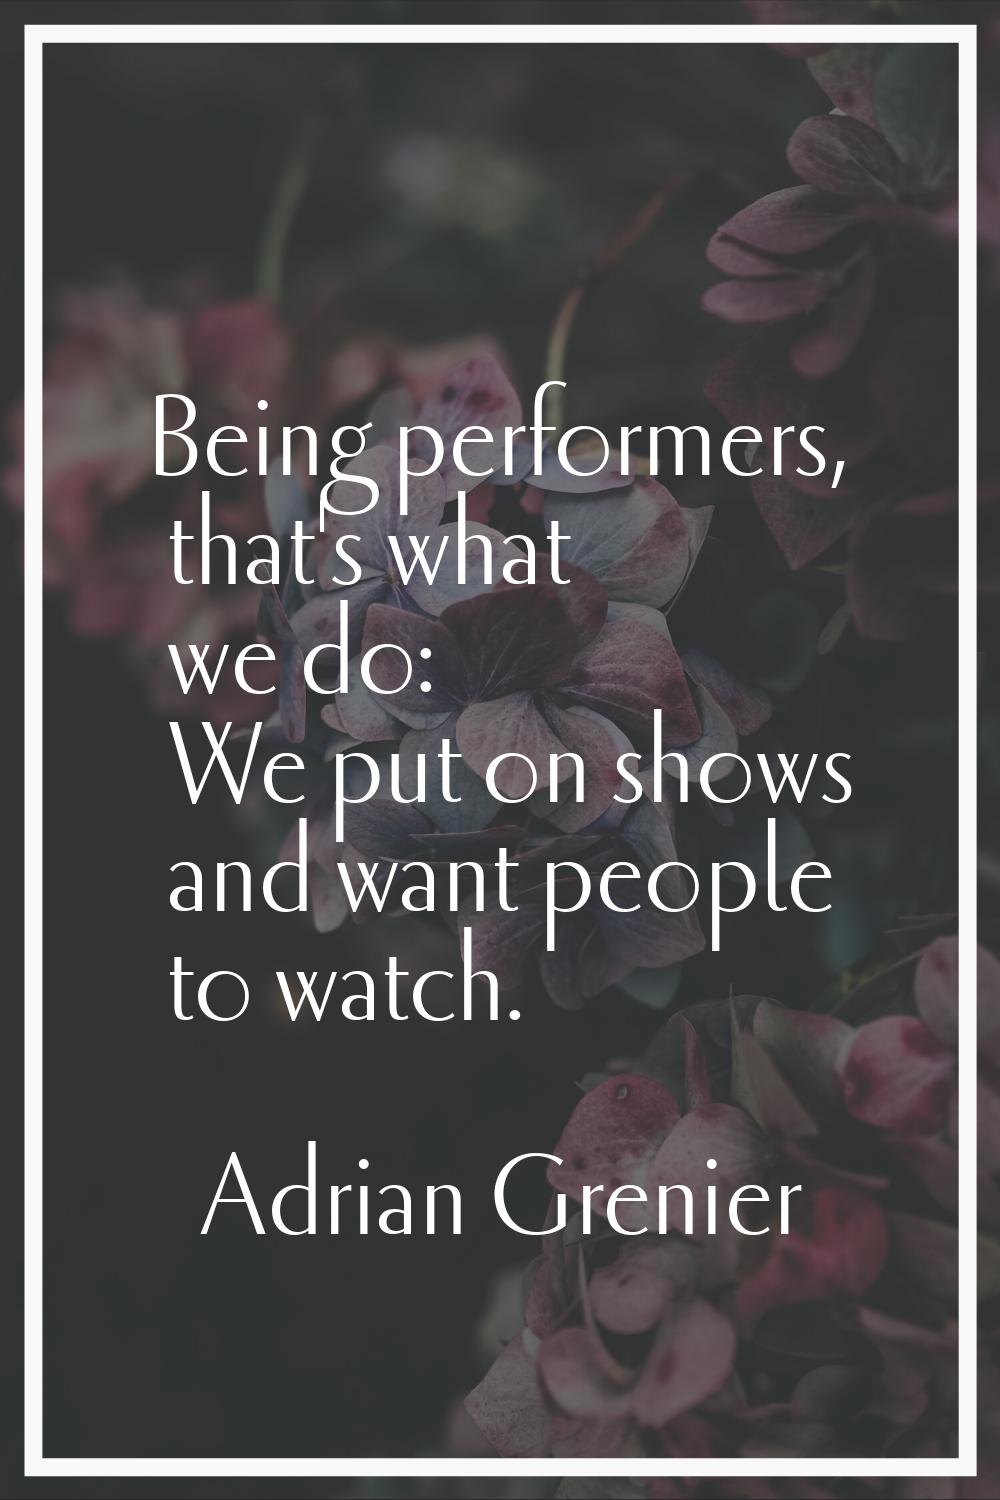 Being performers, that's what we do: We put on shows and want people to watch.